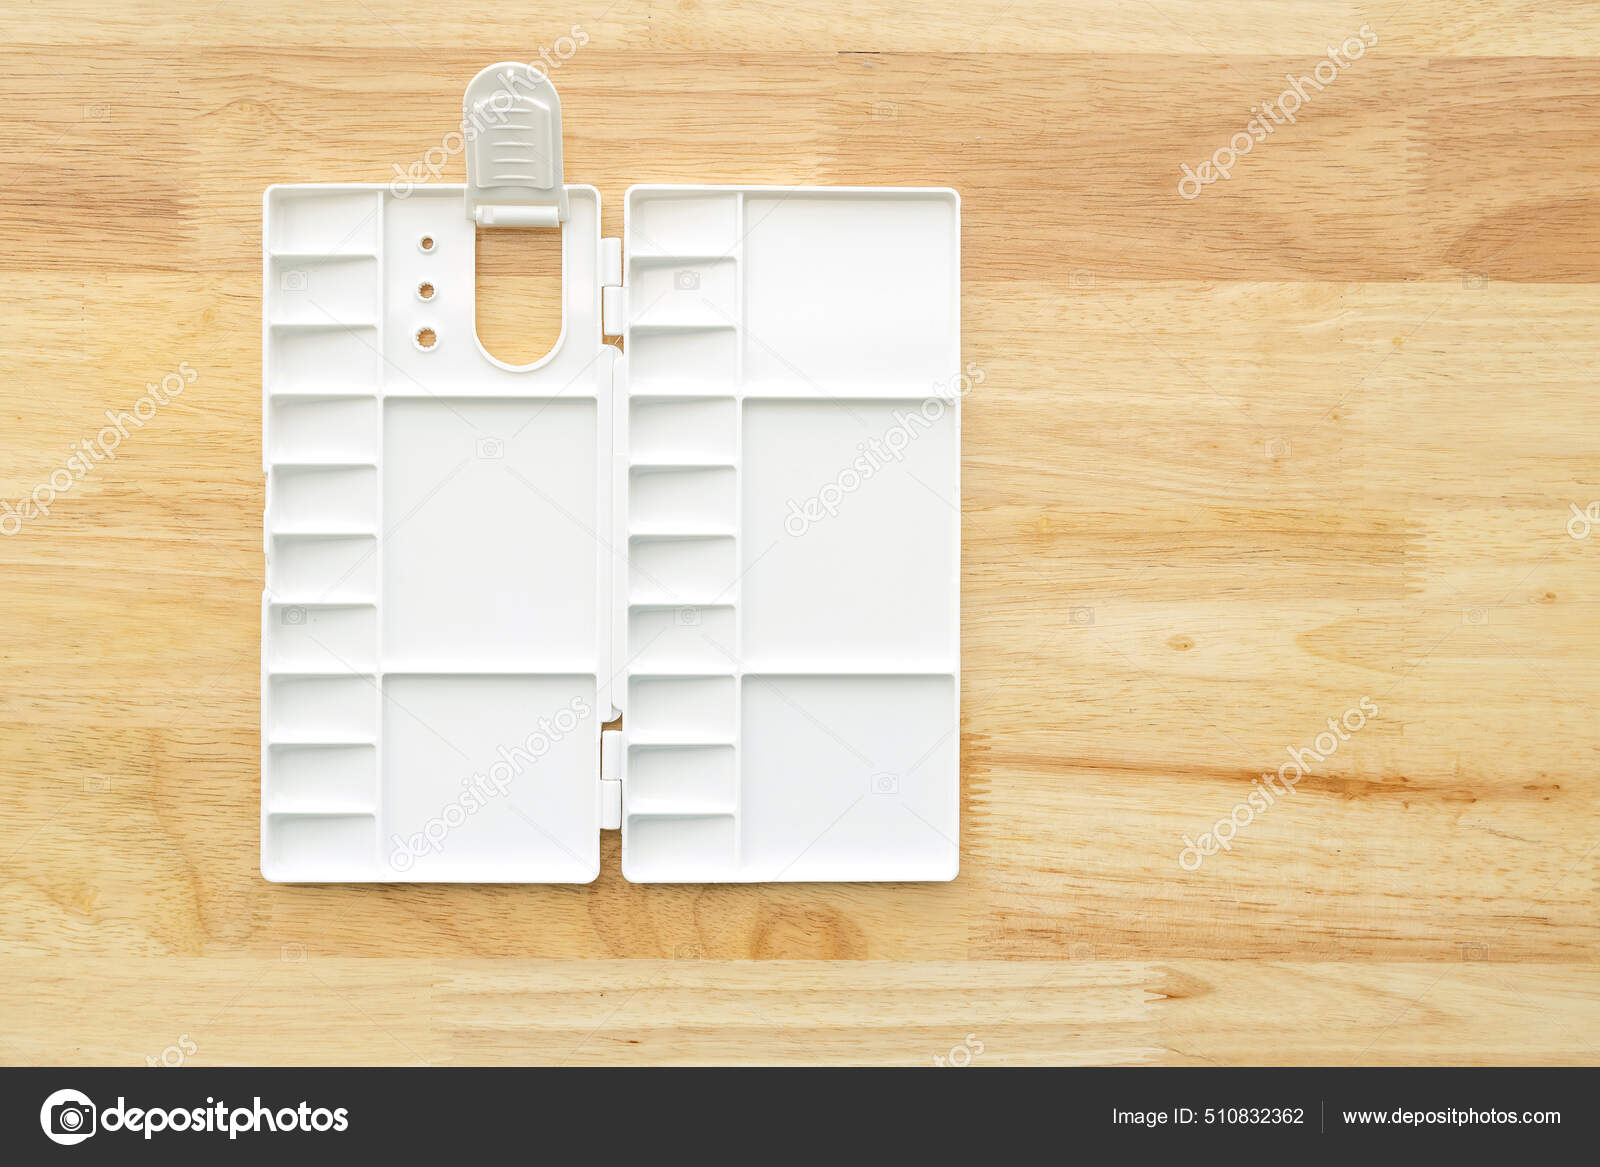 White Watercolor Palette. Empty Watercolor Tray Isolated on Wood Background  Stock Image - Image of artists, drawing: 238250329